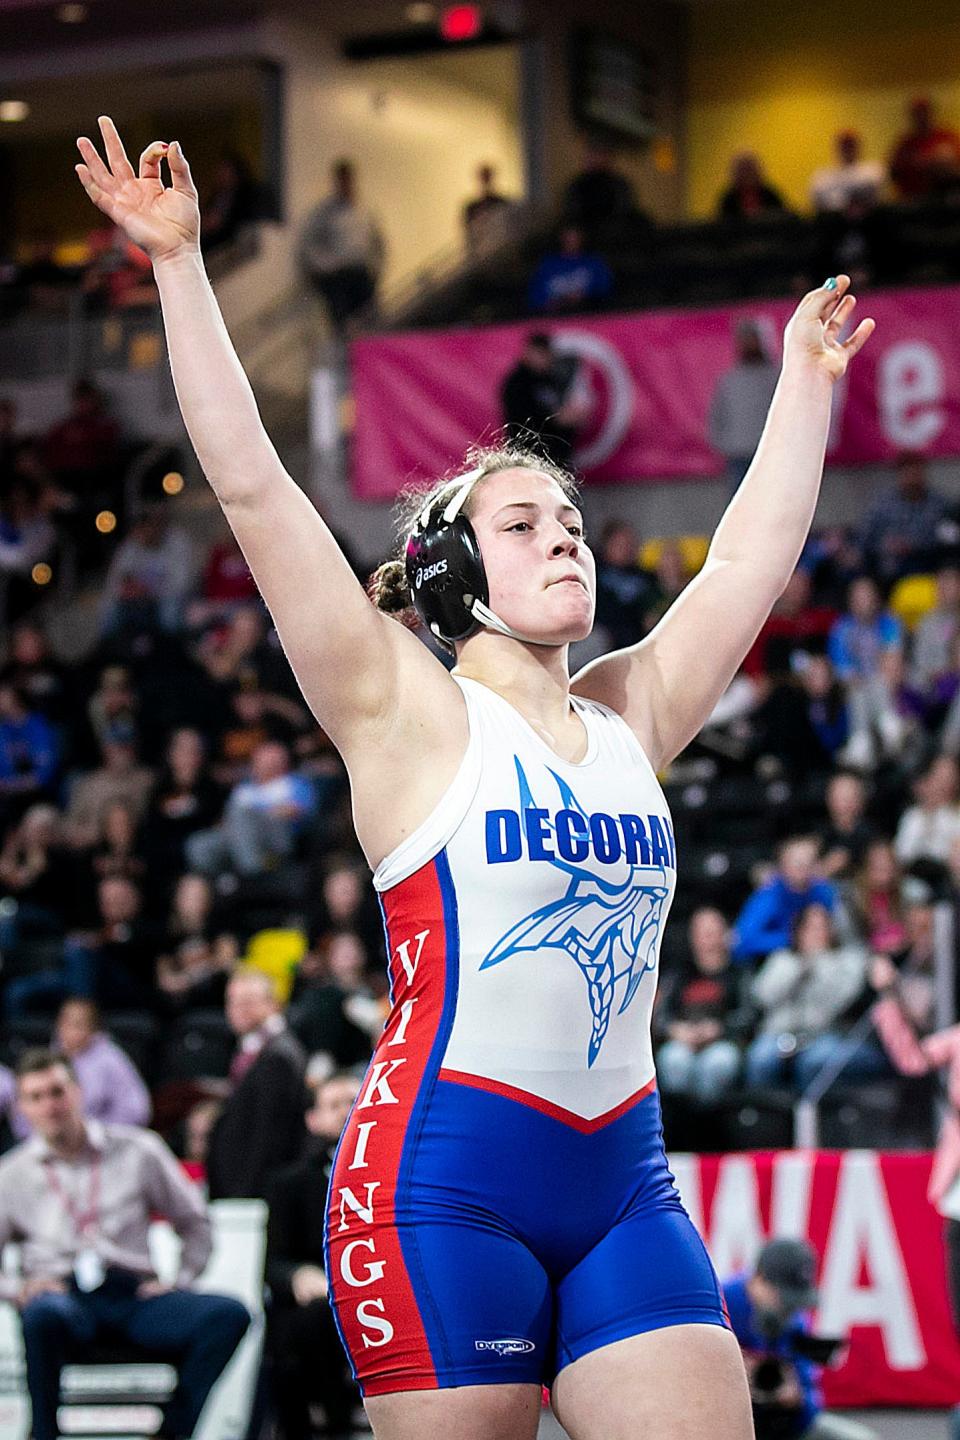 Decorah's Naomi Simon celebrates after scoring a fall at 170 pounds in the finals during the IGHSAU state girls wrestling tournament, Friday, Feb. 3, 2023, at the Xtream Arena in Coralville, Iowa.